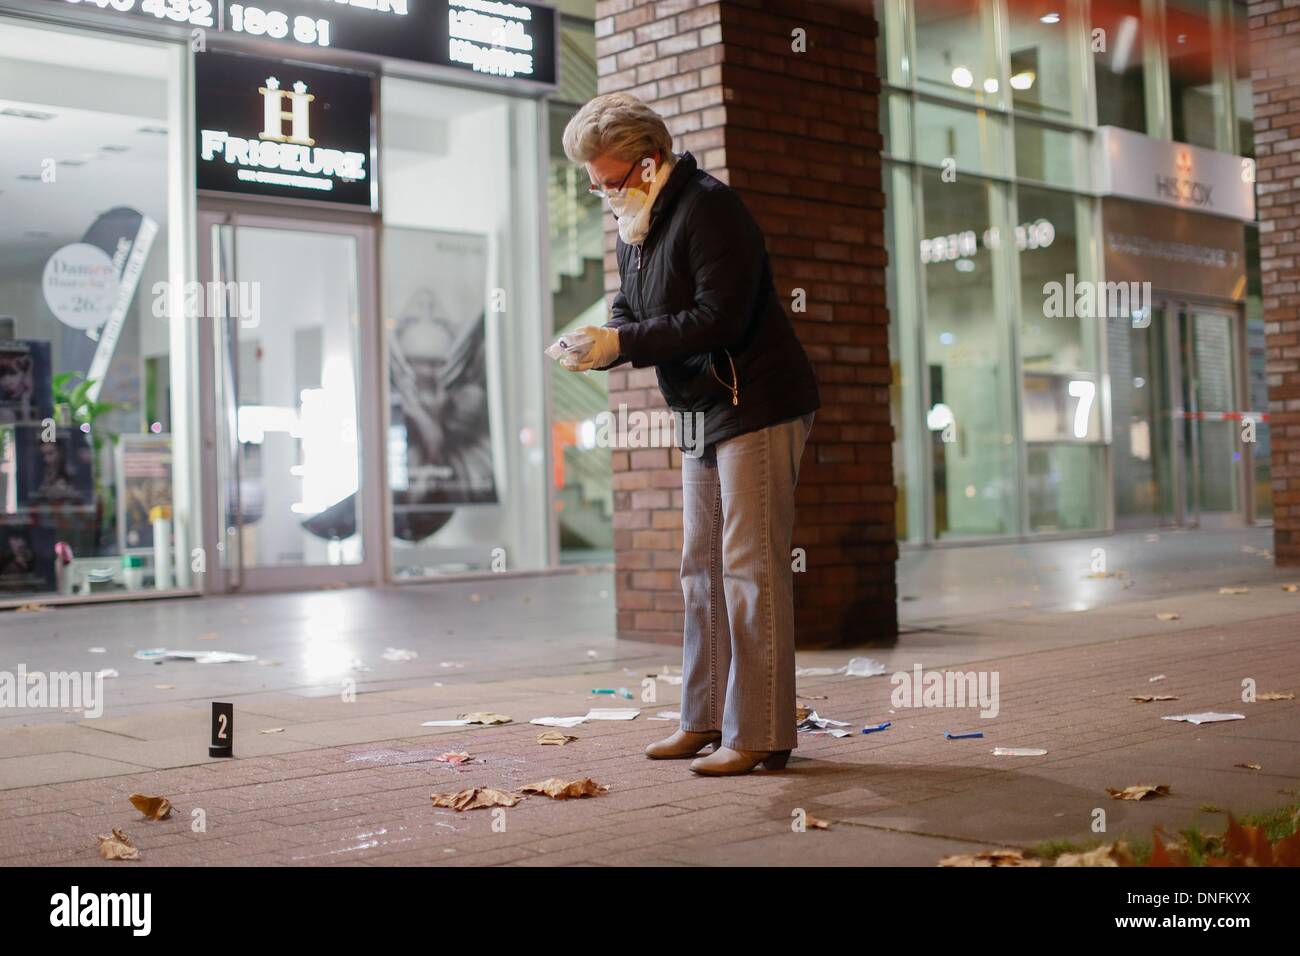 A female forensic expert of the Hamburg Police inspects a crime scene in Hamburg, Germany, 25 December 2013. A woman stabbed and fatally injured a man on the street during an escalated dispute. Photo: Paul Weidenbaum/dpa Stock Photo